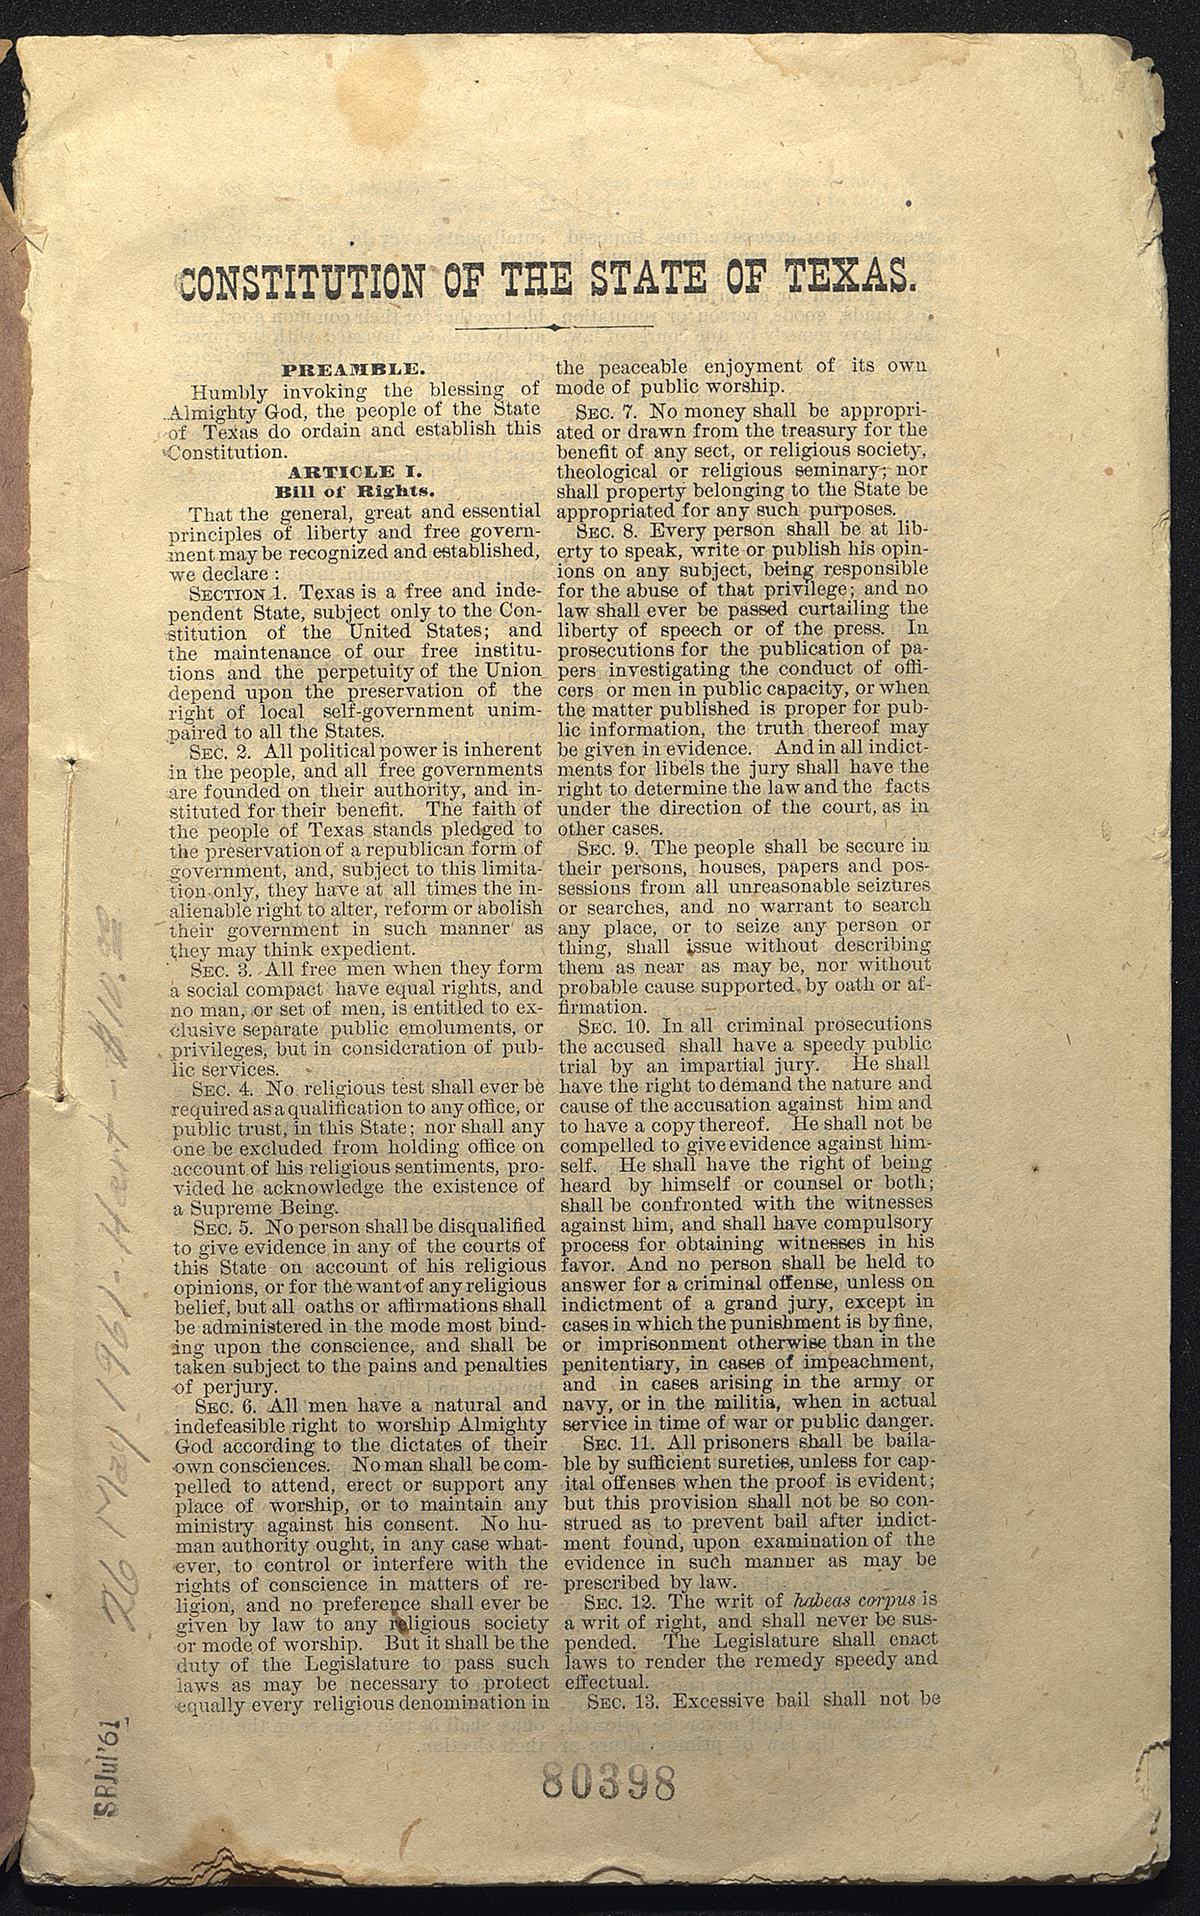 Preamble; Article I, Sections 1-13